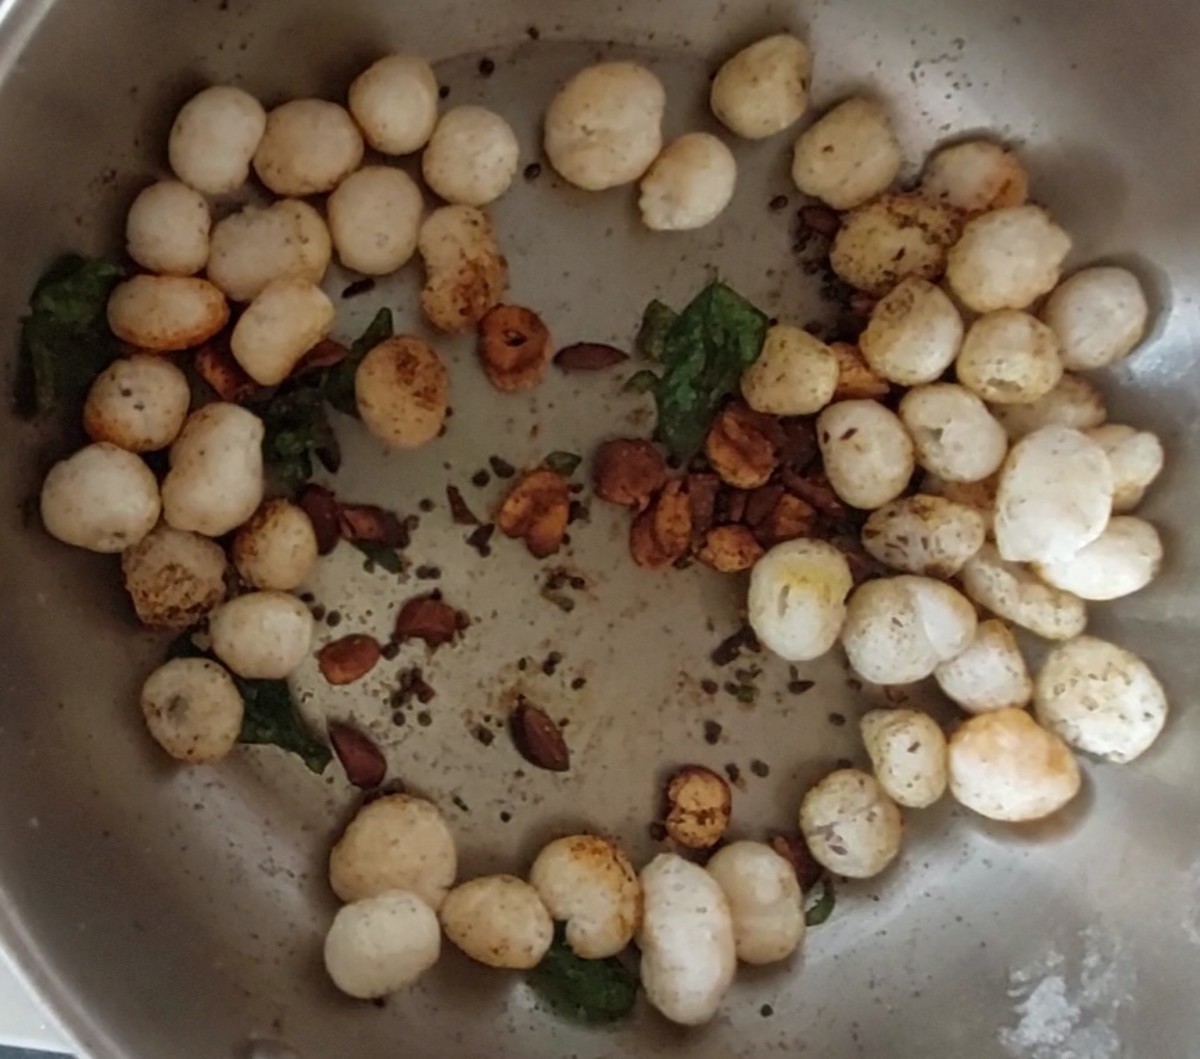 Mix well to combine lotus seeds with spices (use hands or spatula to mix).